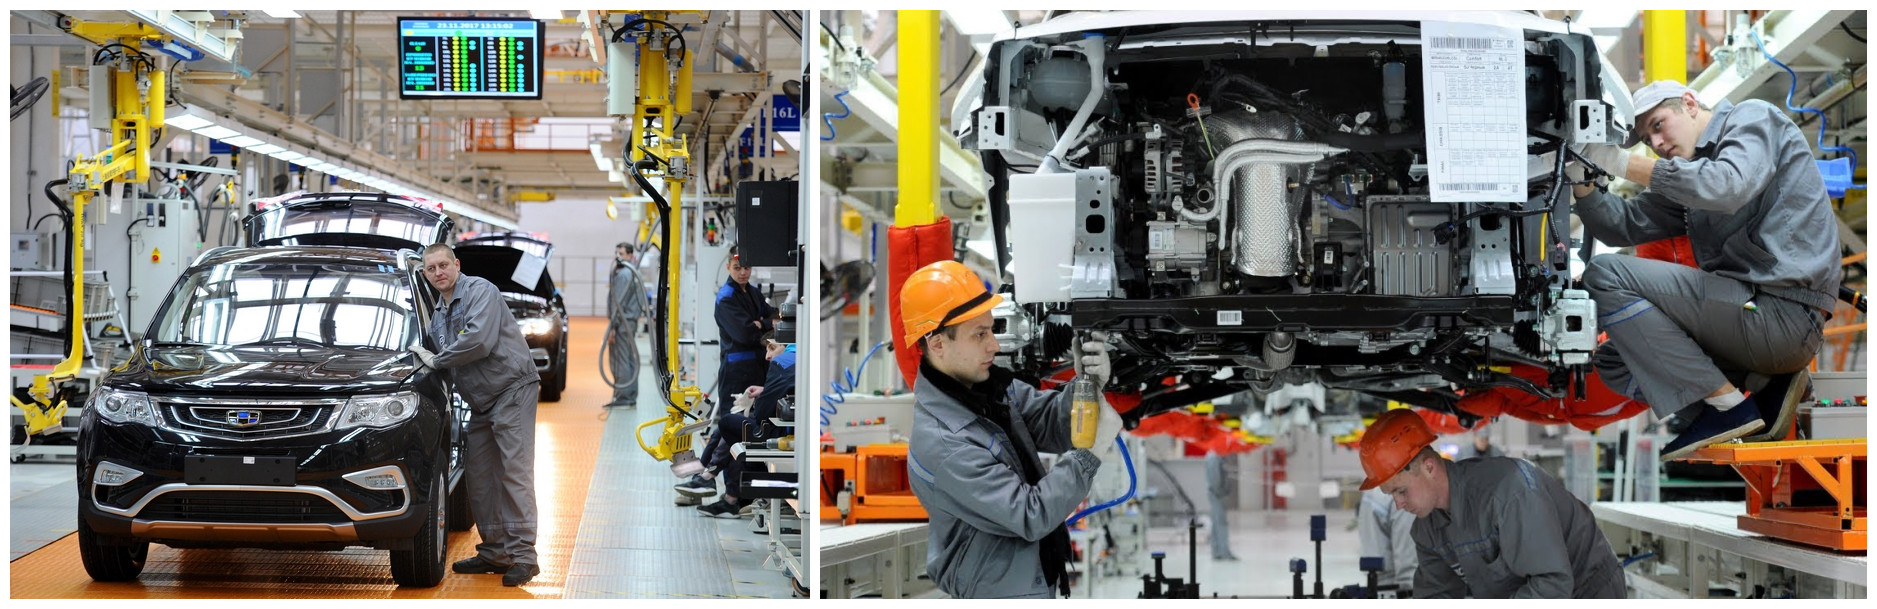 Car manufacturing assembly line in assembly shop